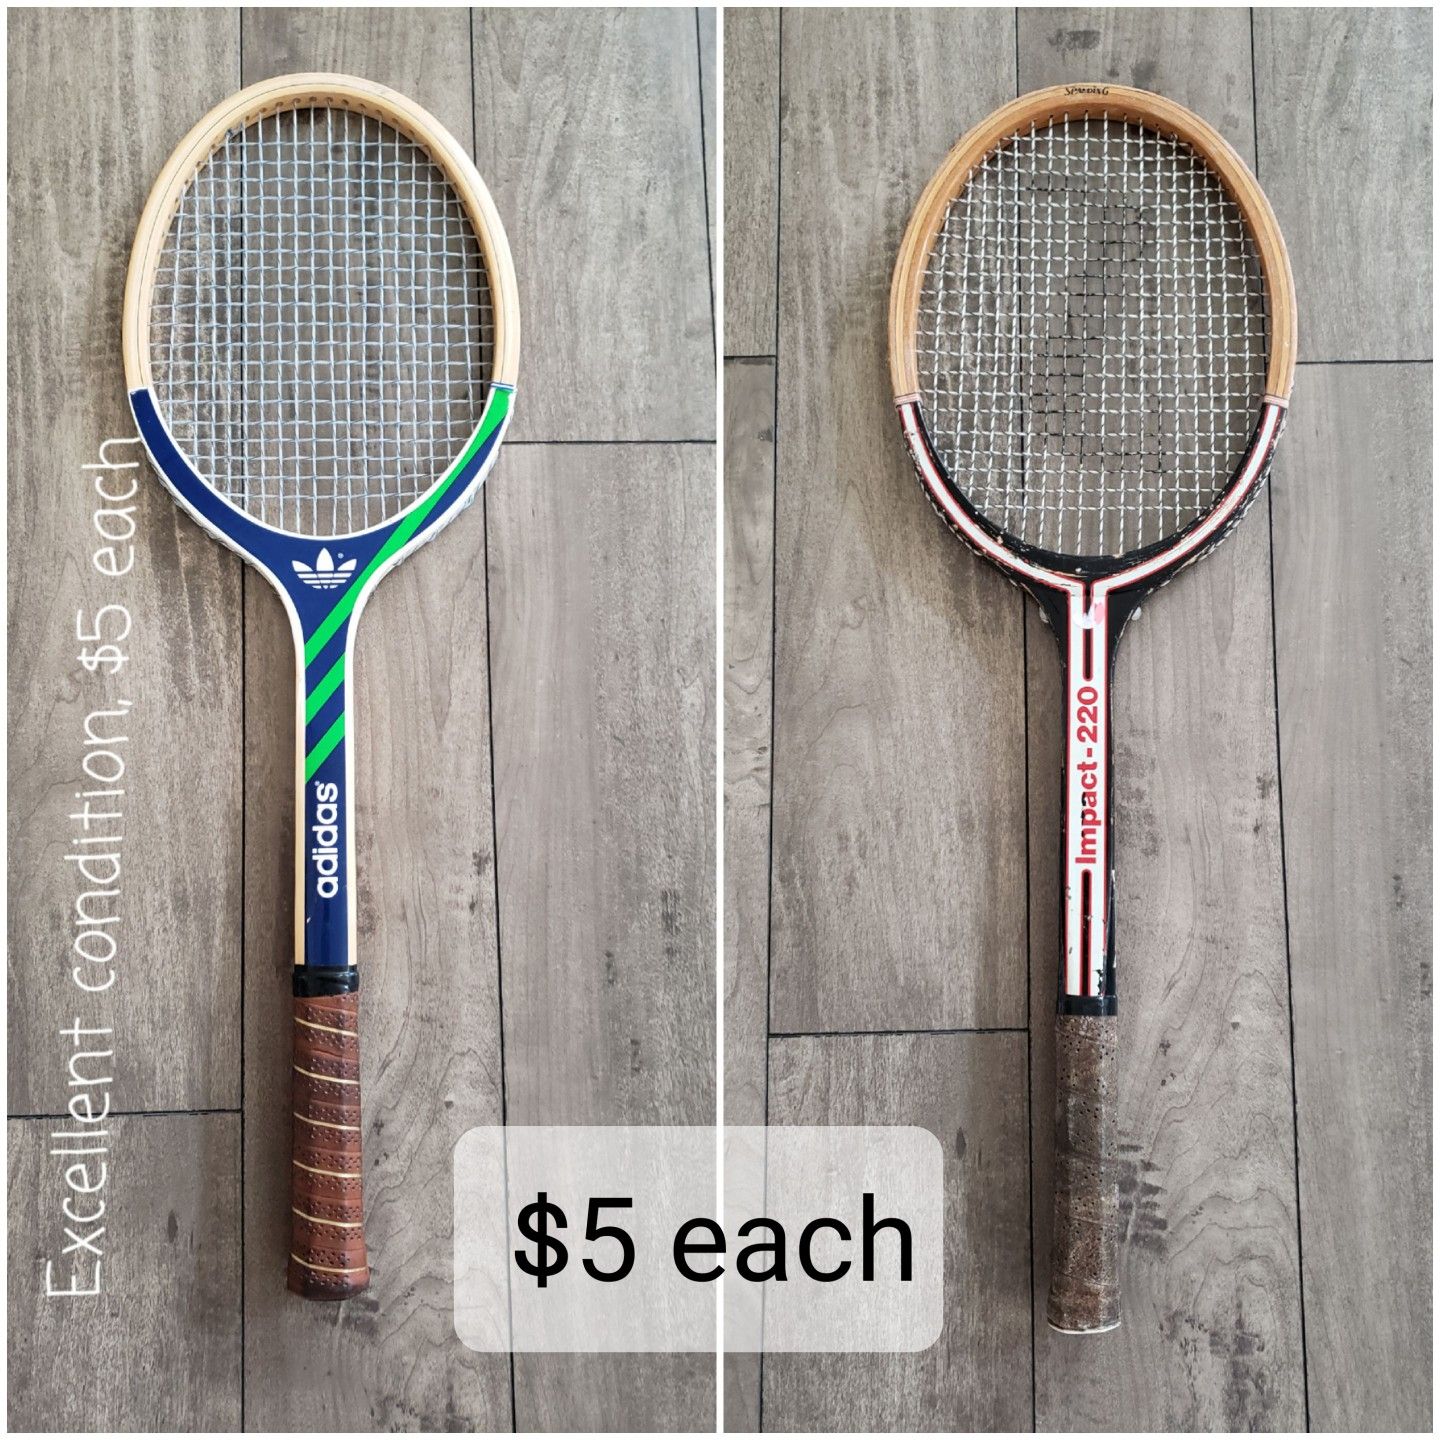 Tennis Rackets, very good condition